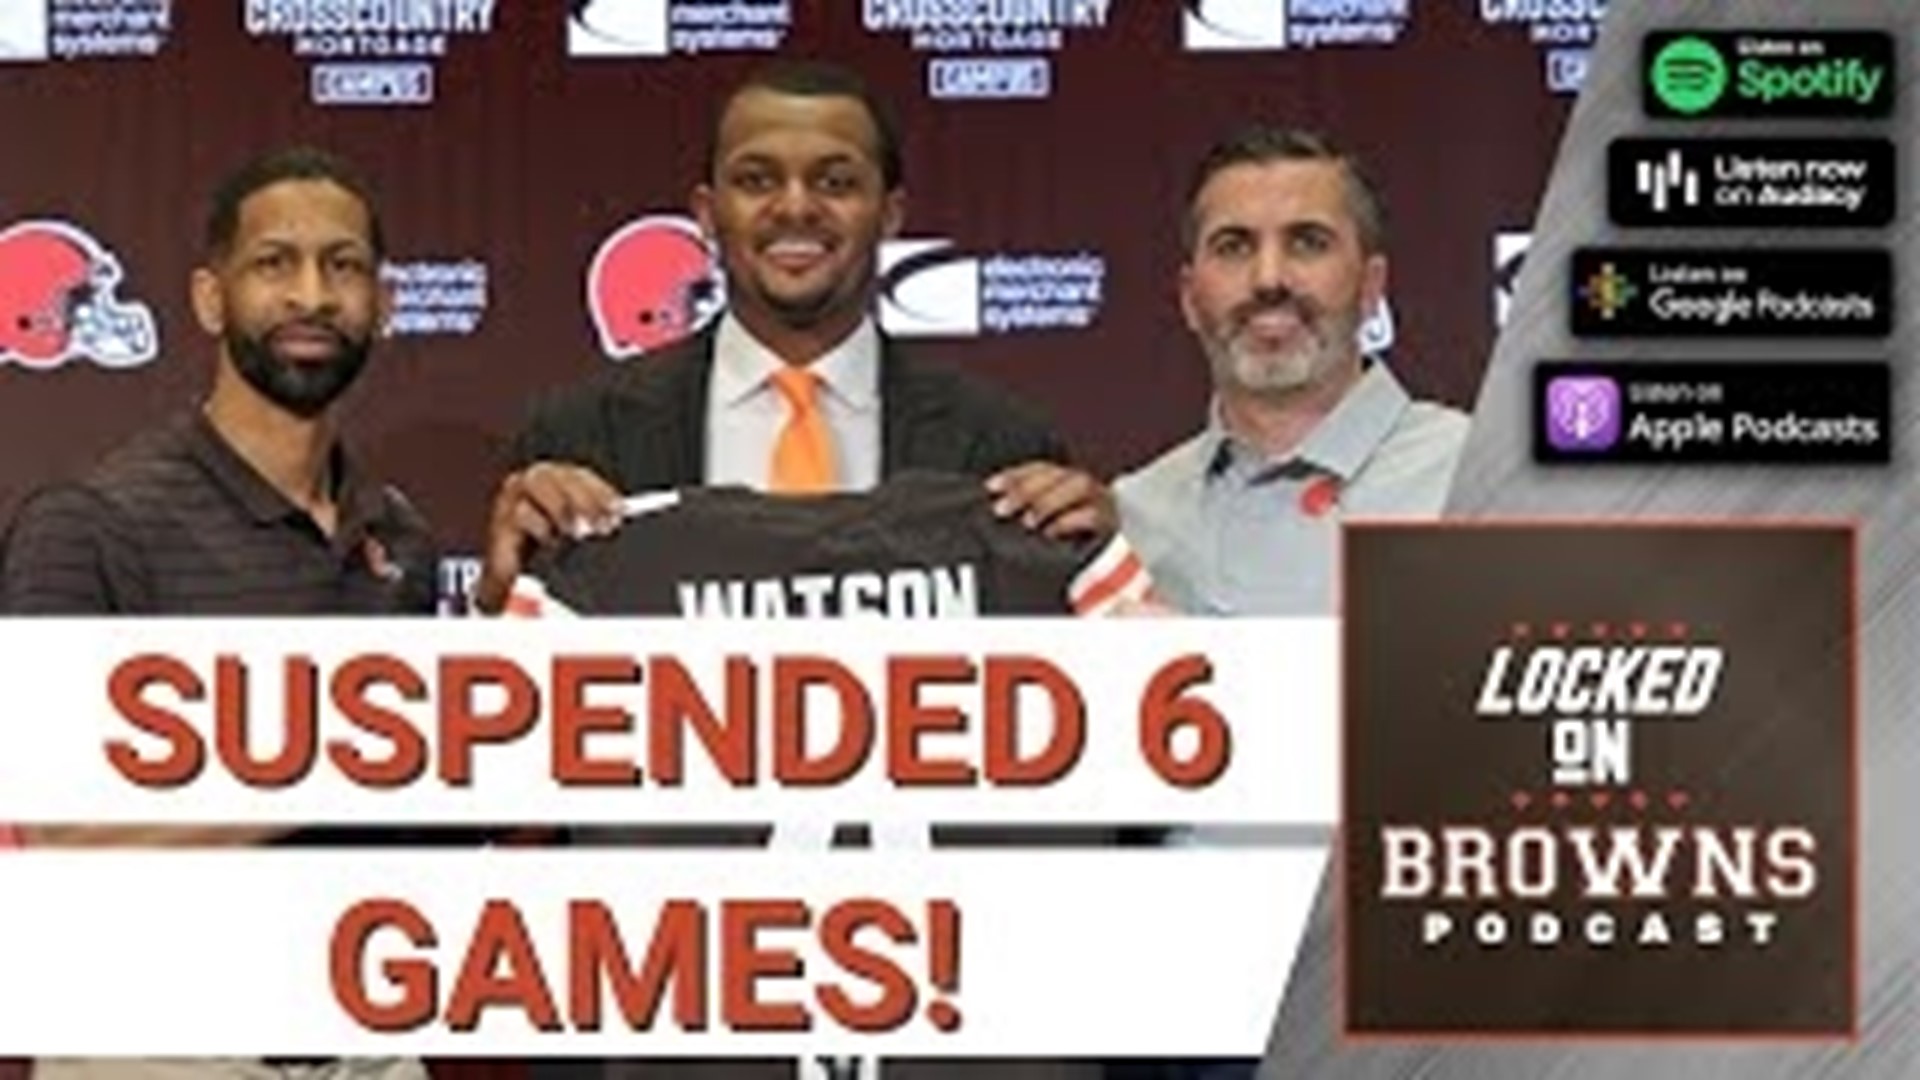 Garrett Bush and Jeff Lloyd of the Locked On Browns Podcast discuss the latest Cleveland Browns news including the 6 game suspension for Deshaun Watson.